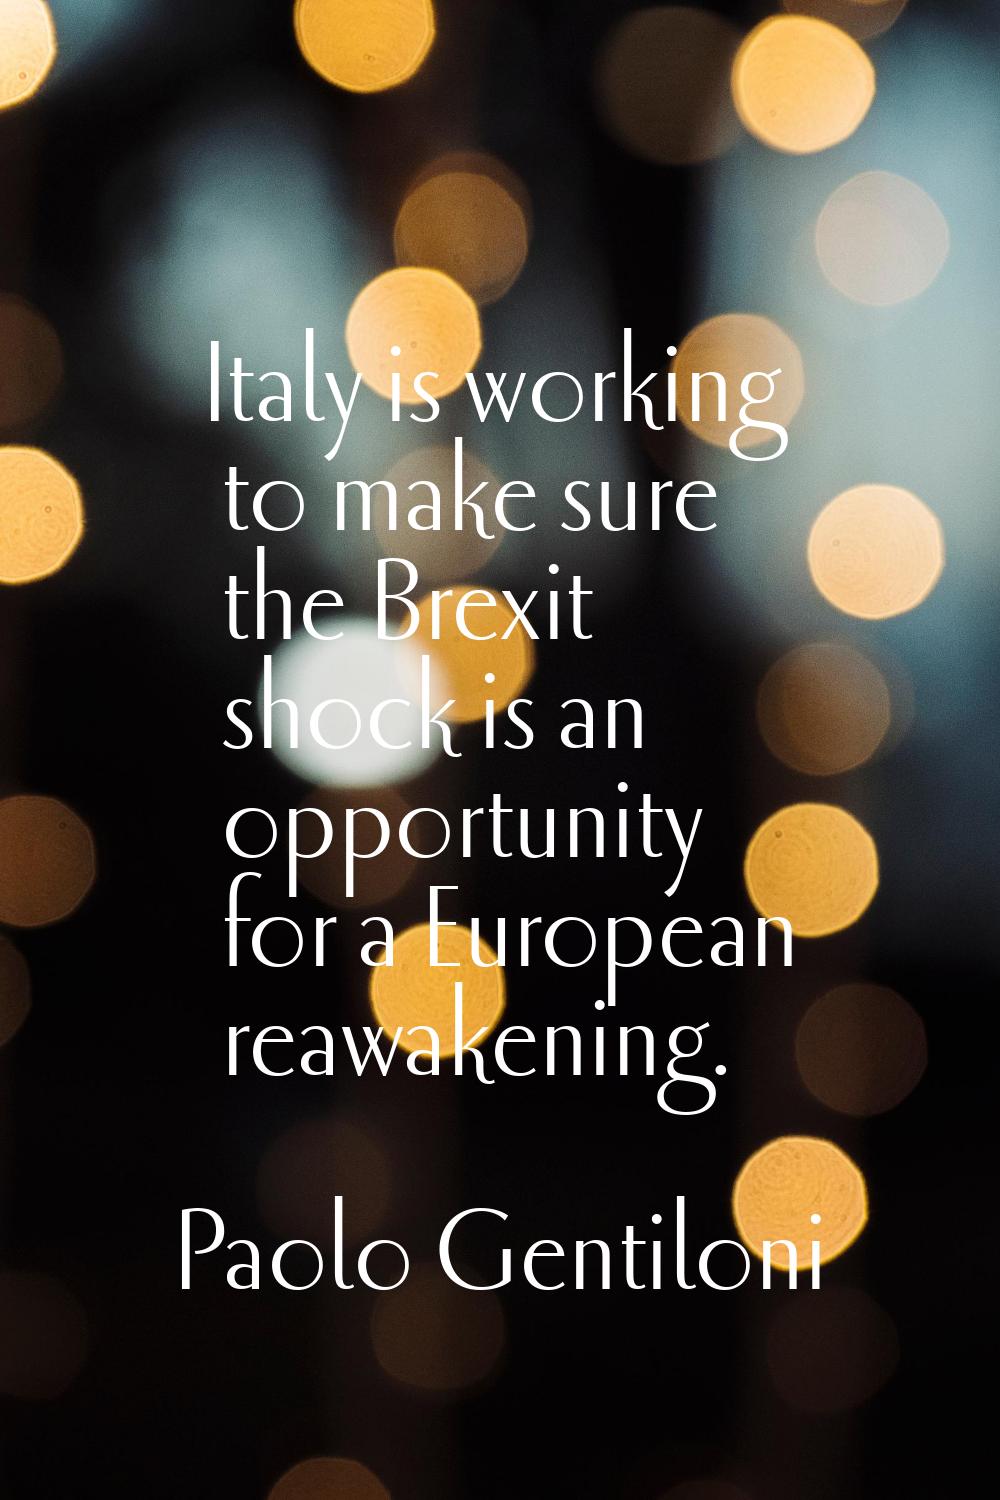 Italy is working to make sure the Brexit shock is an opportunity for a European reawakening.